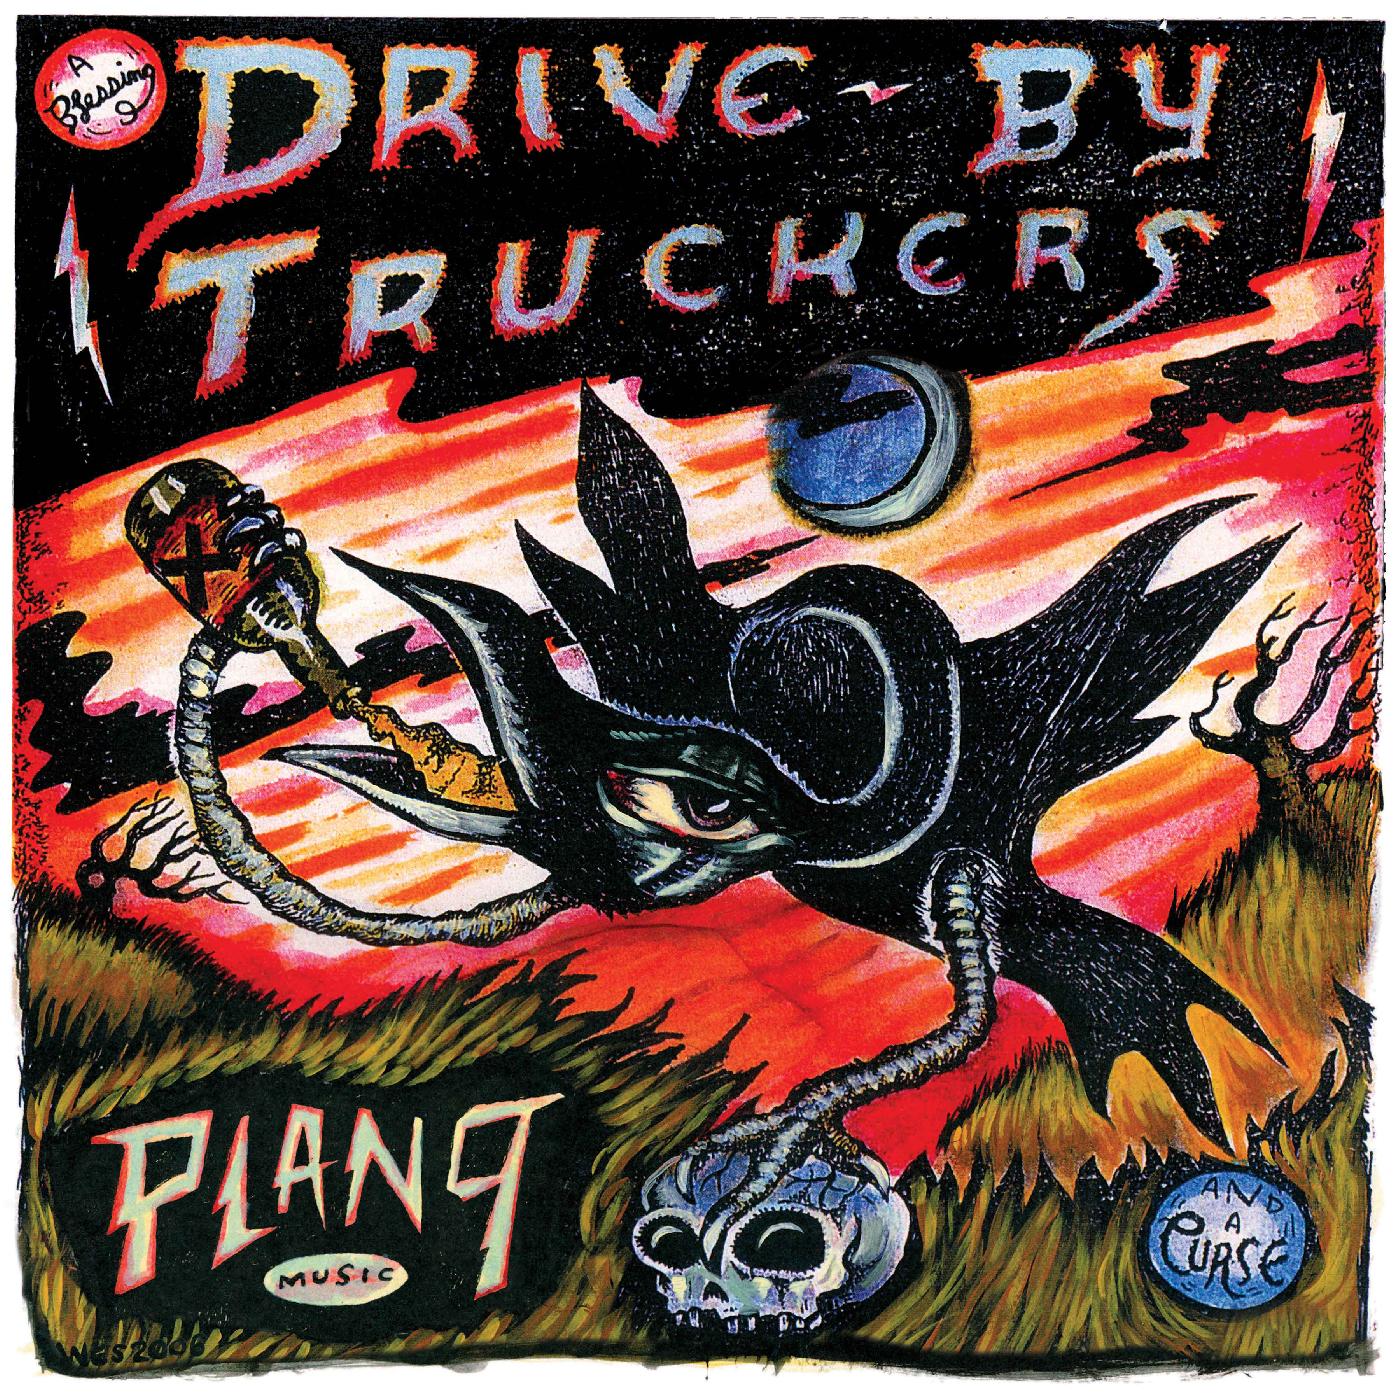 Drive-By Truckers | Plan 9 Records July 13, 2006 | CD